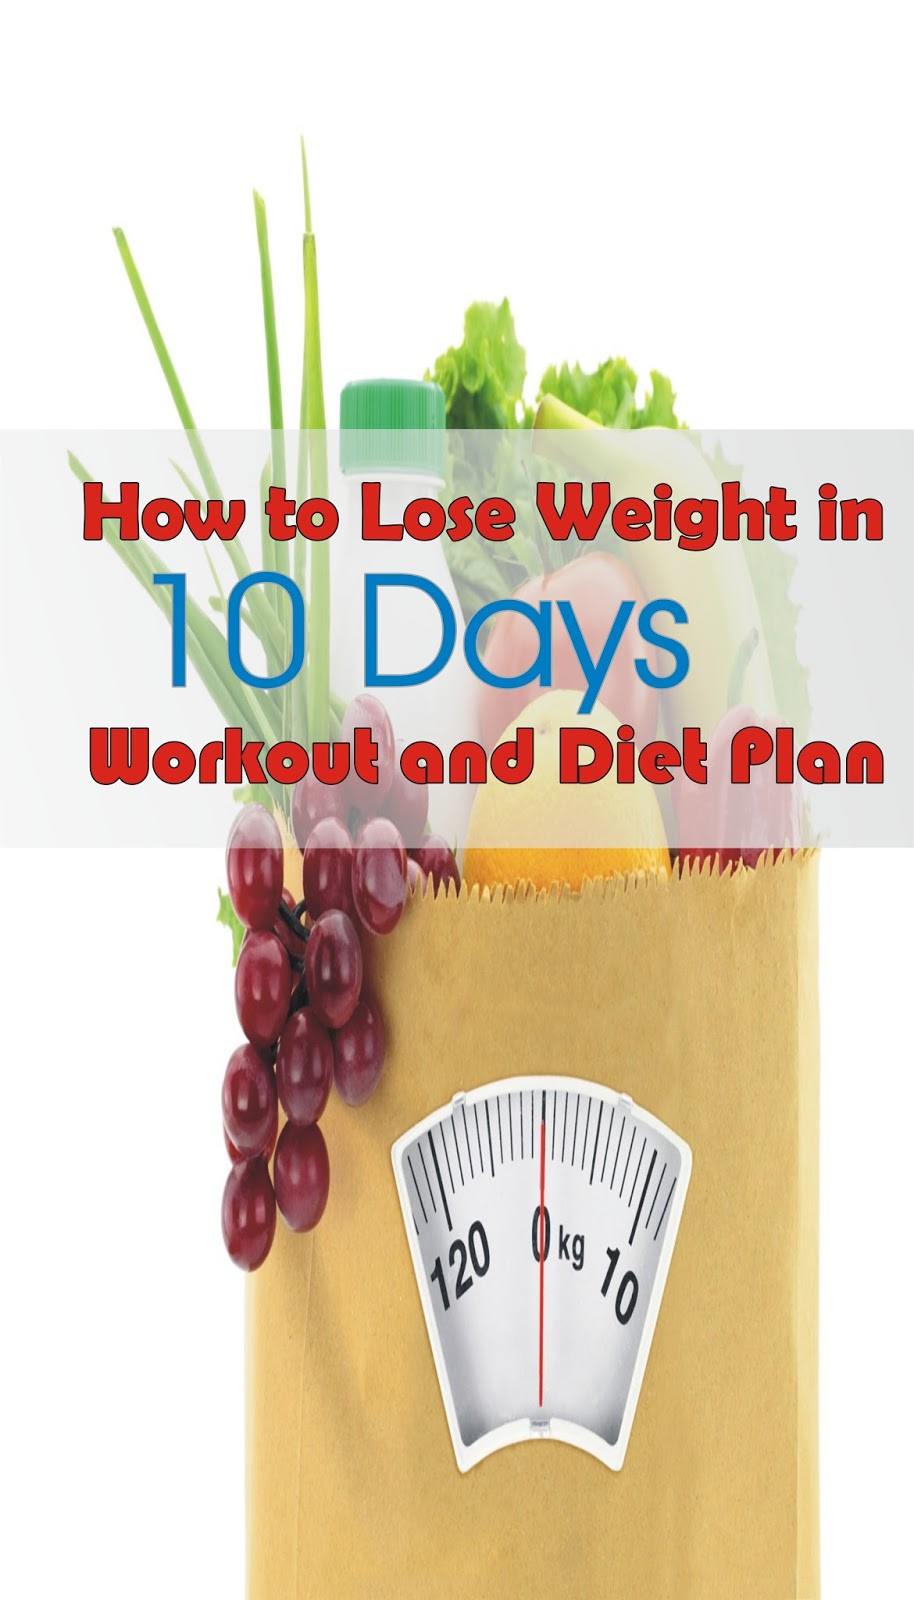 How To Lose Weight In 10 Days
 How to Lose Weight in 10 Days Detailed Guide With Weight